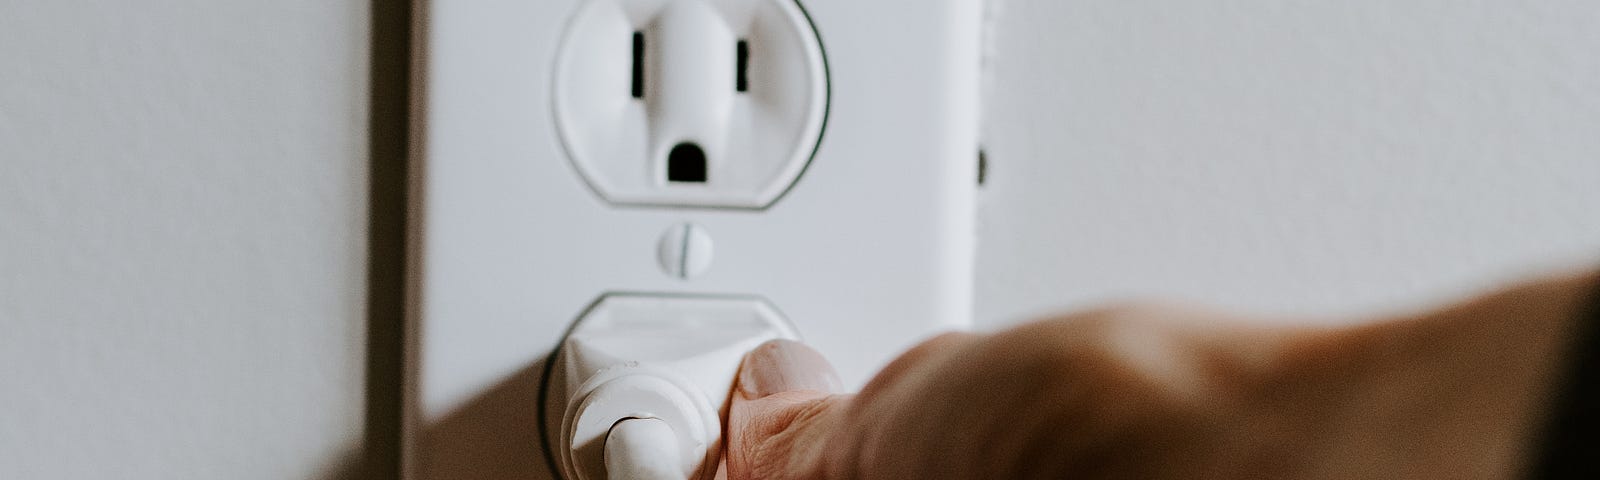 A hand removing a plug from a wall socket